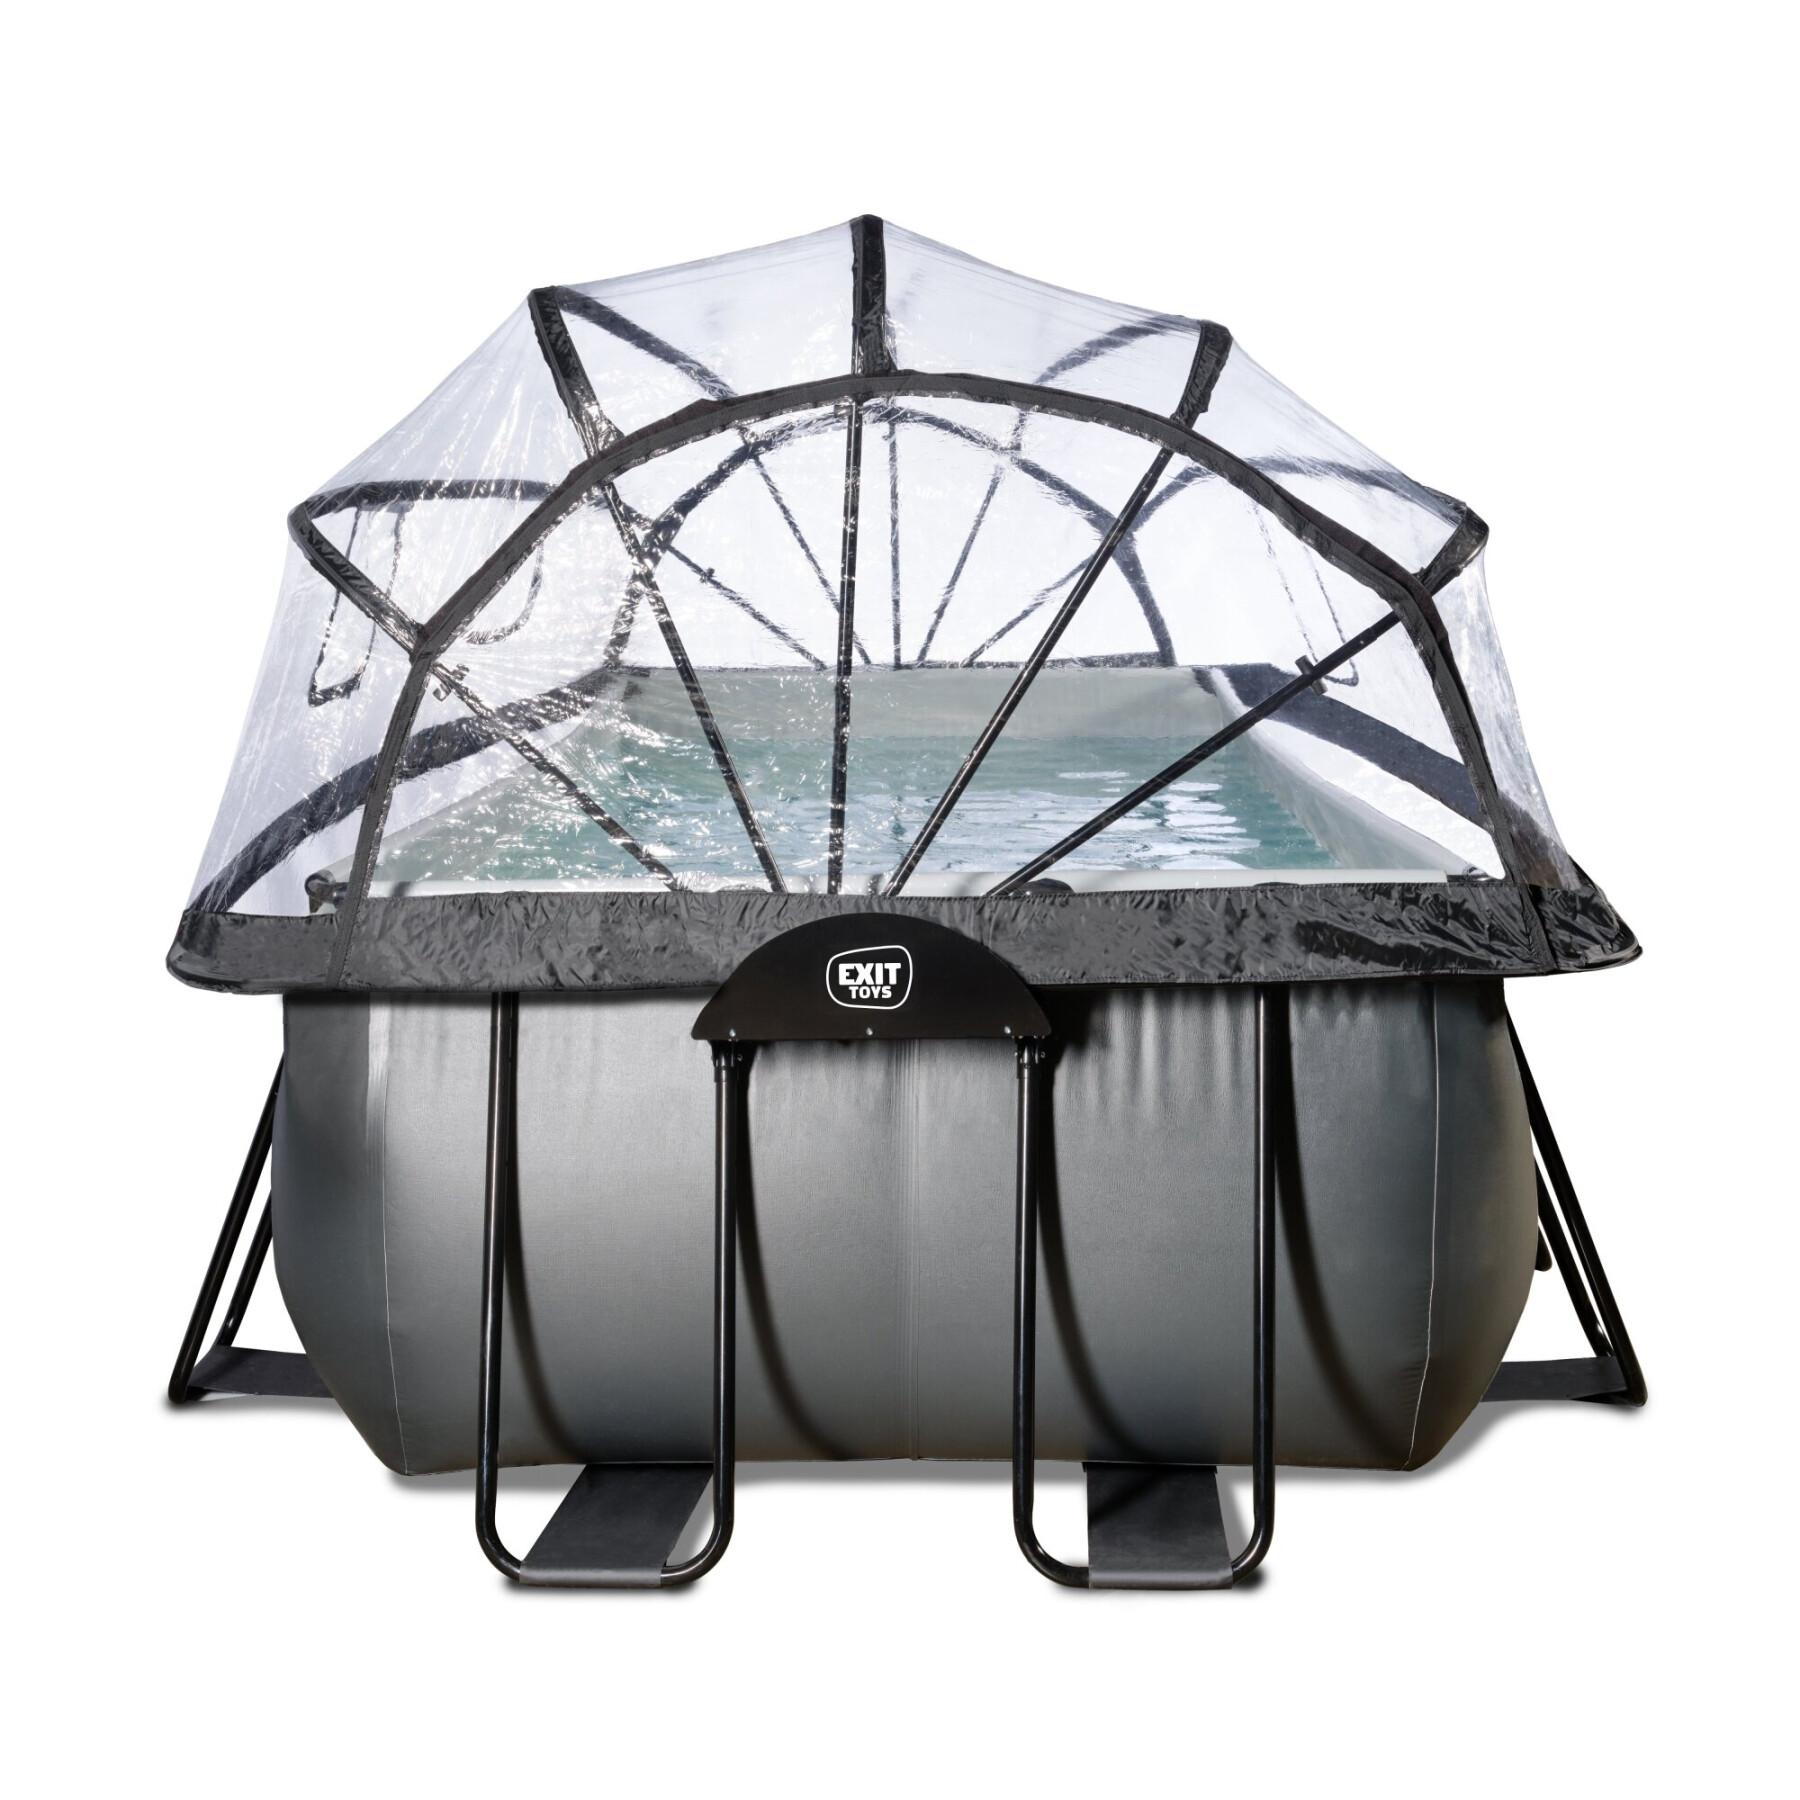 Swimming pool with sand filter pump and leather dome for children Exit Toys 400 x 200 x 100 cm